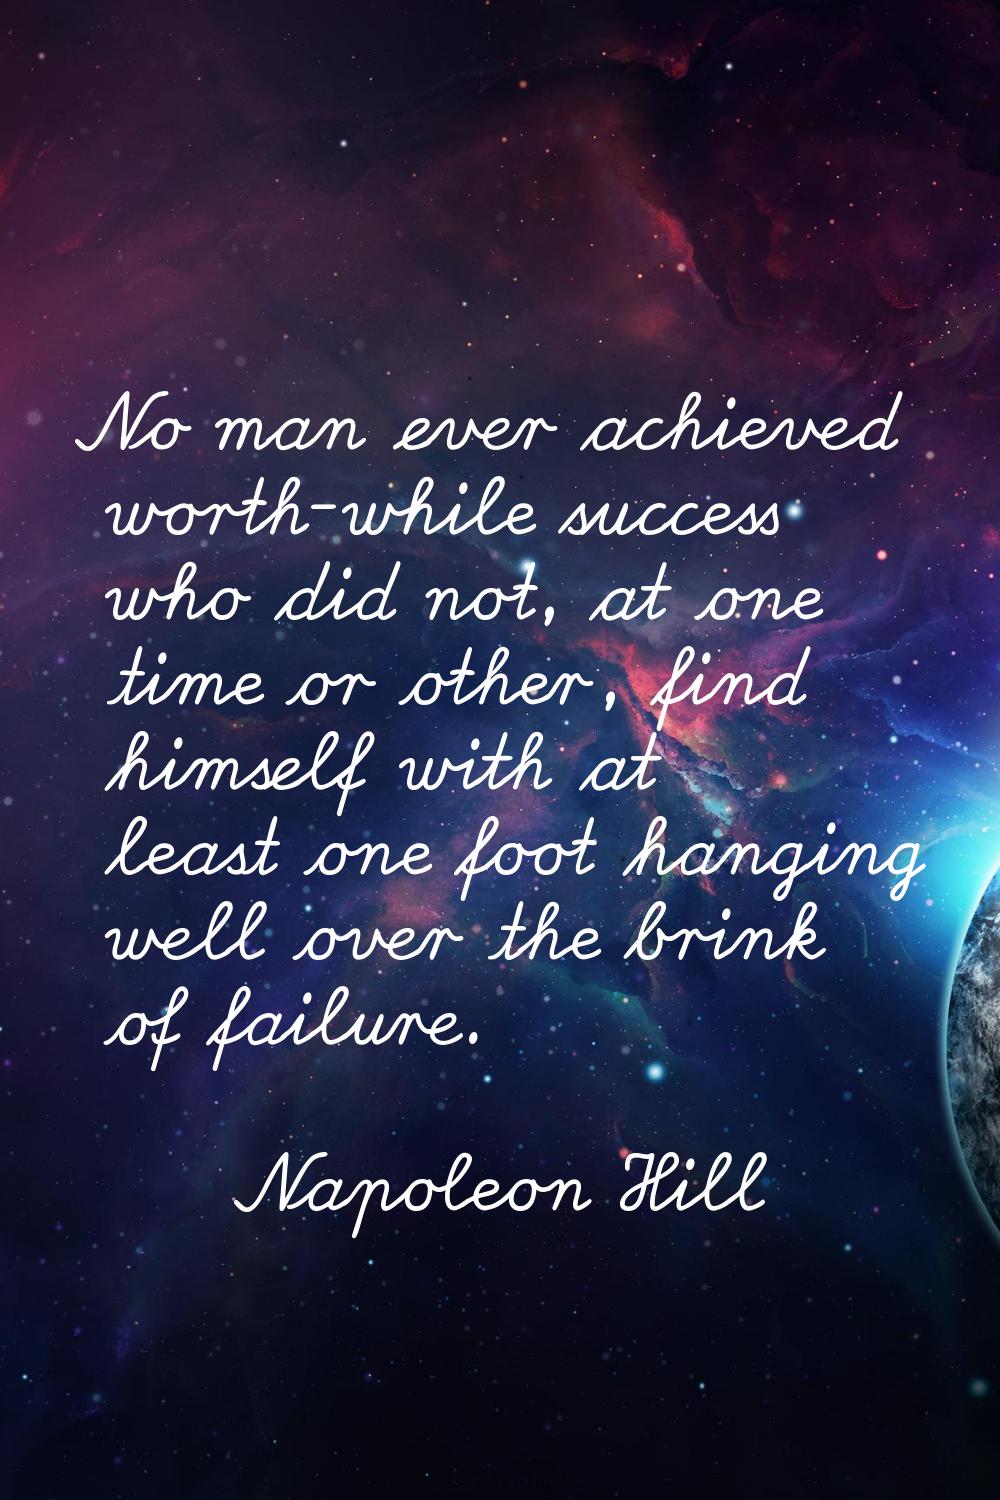 No man ever achieved worth-while success who did not, at one time or other, find himself with at le